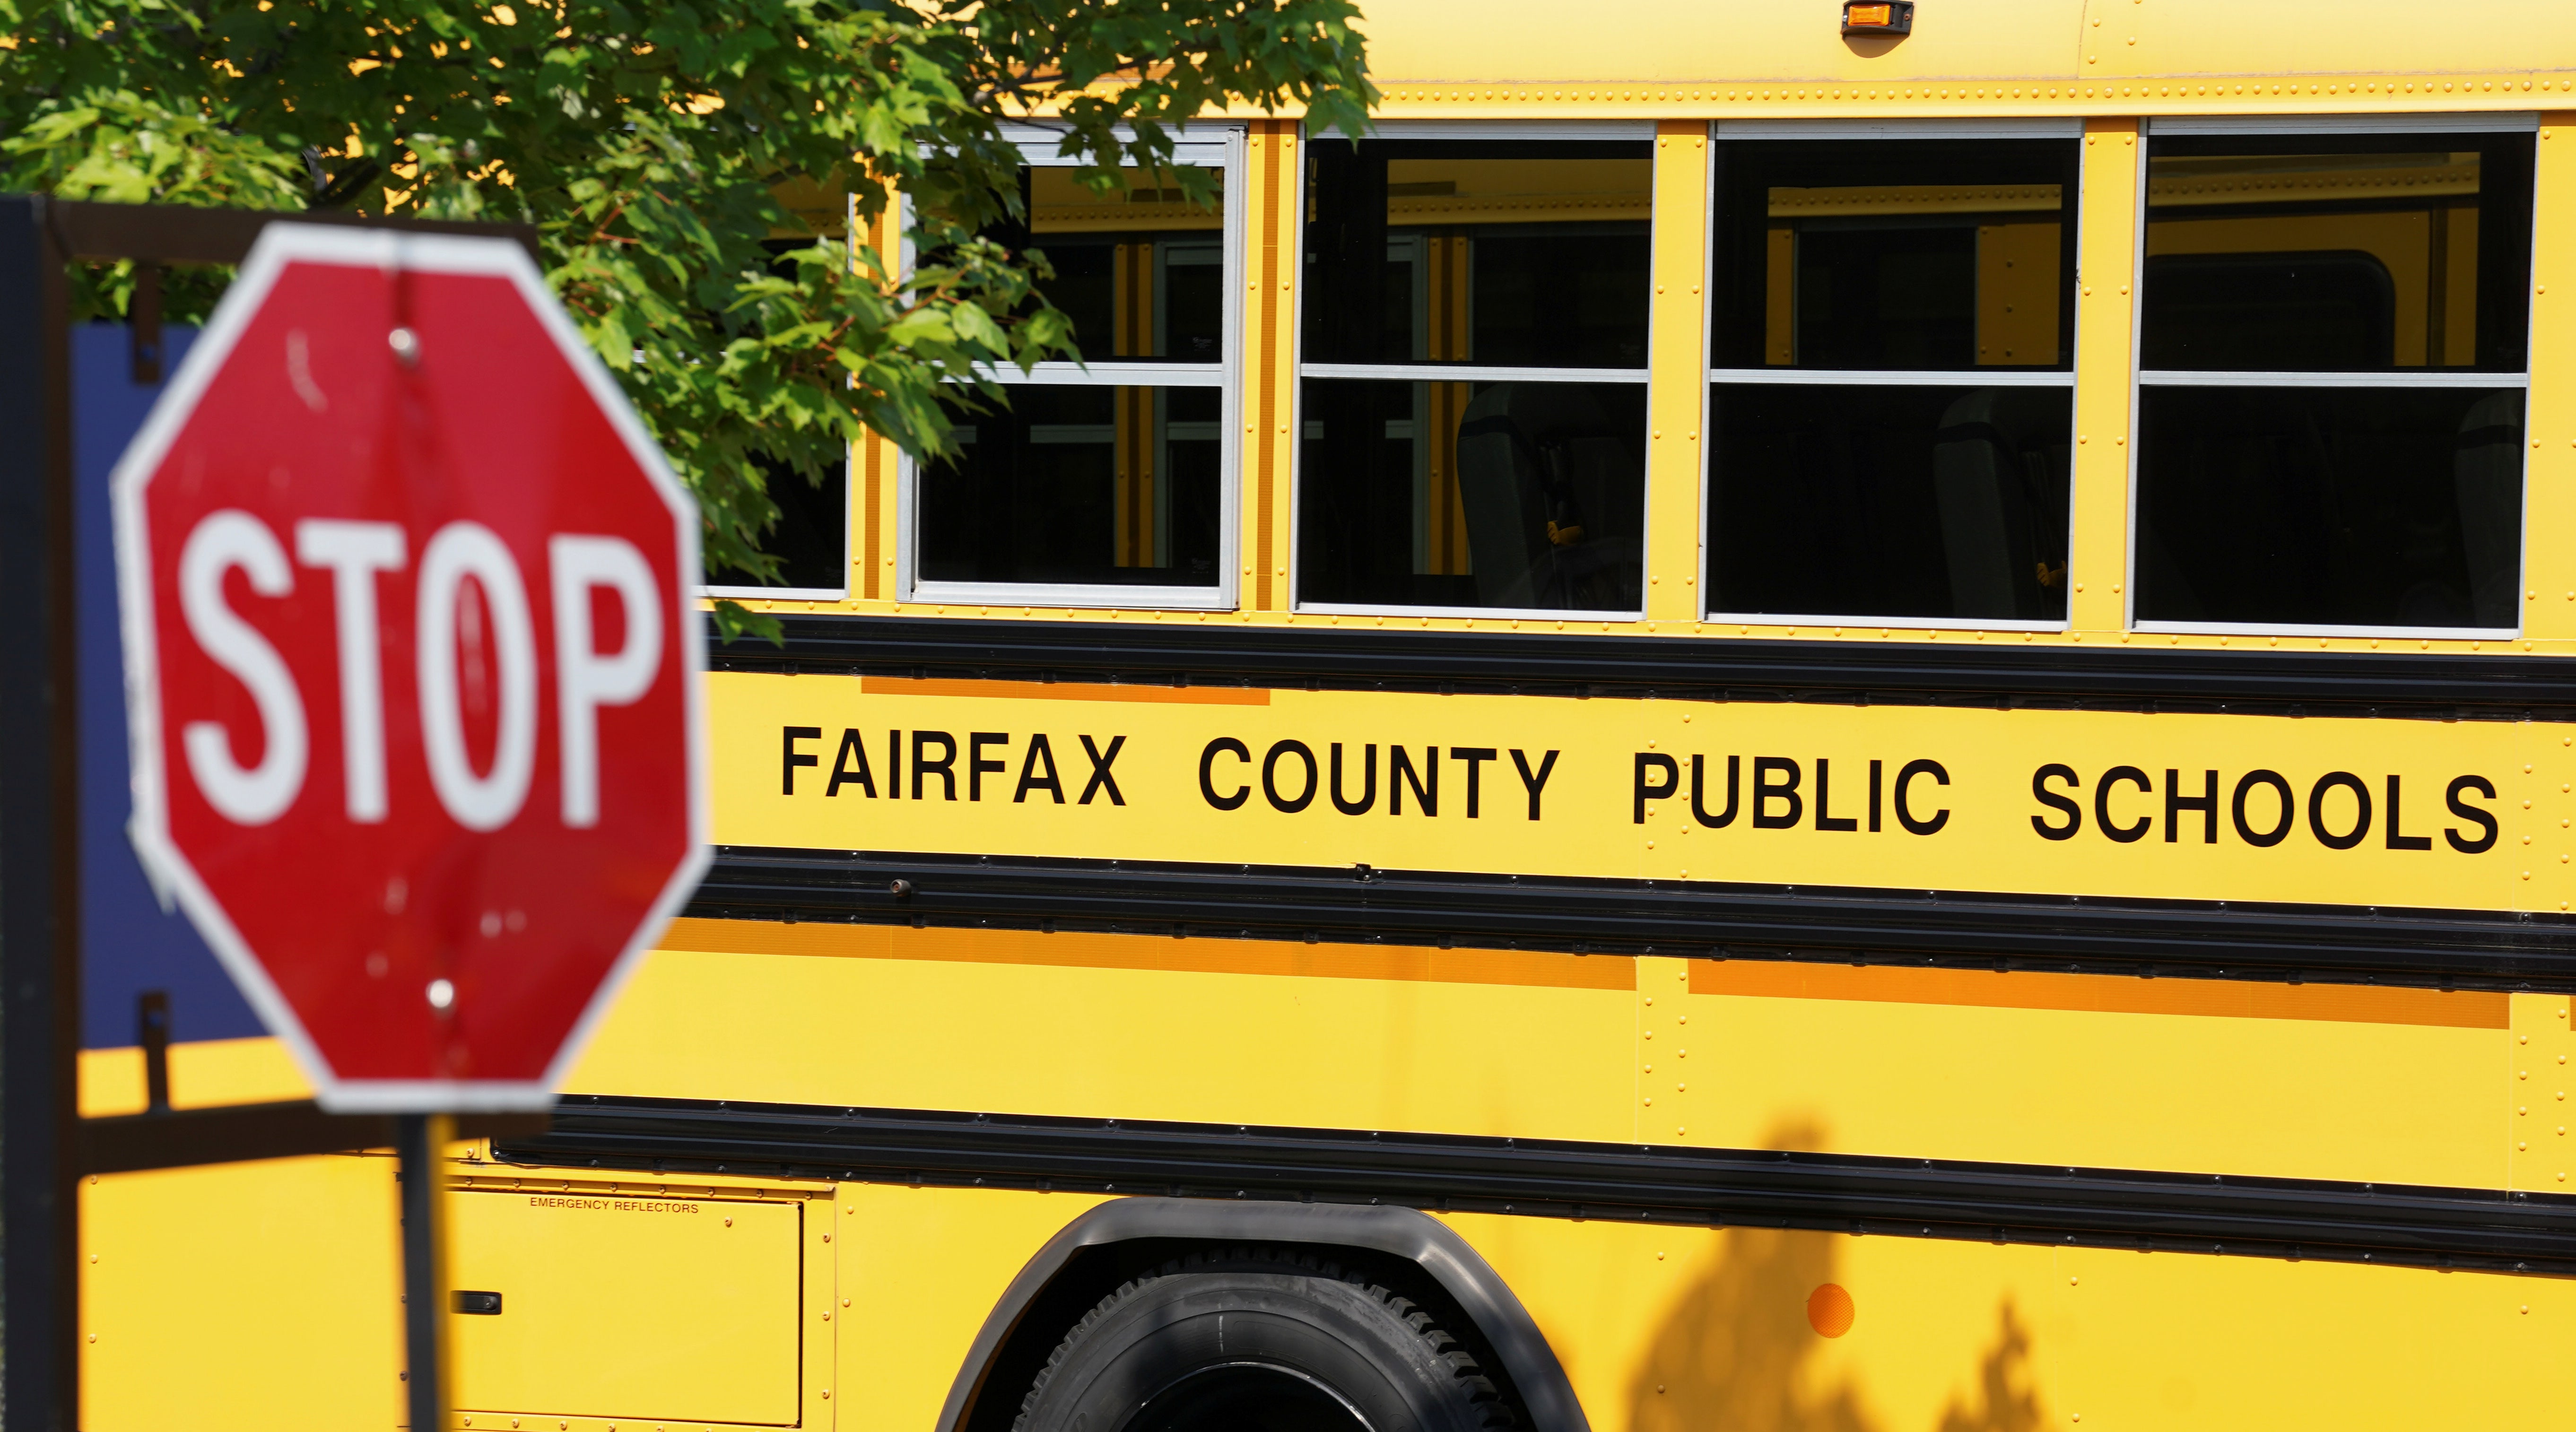  Fairfax County parents demand 'significant changes' to ensure children's safety after counselor firing 